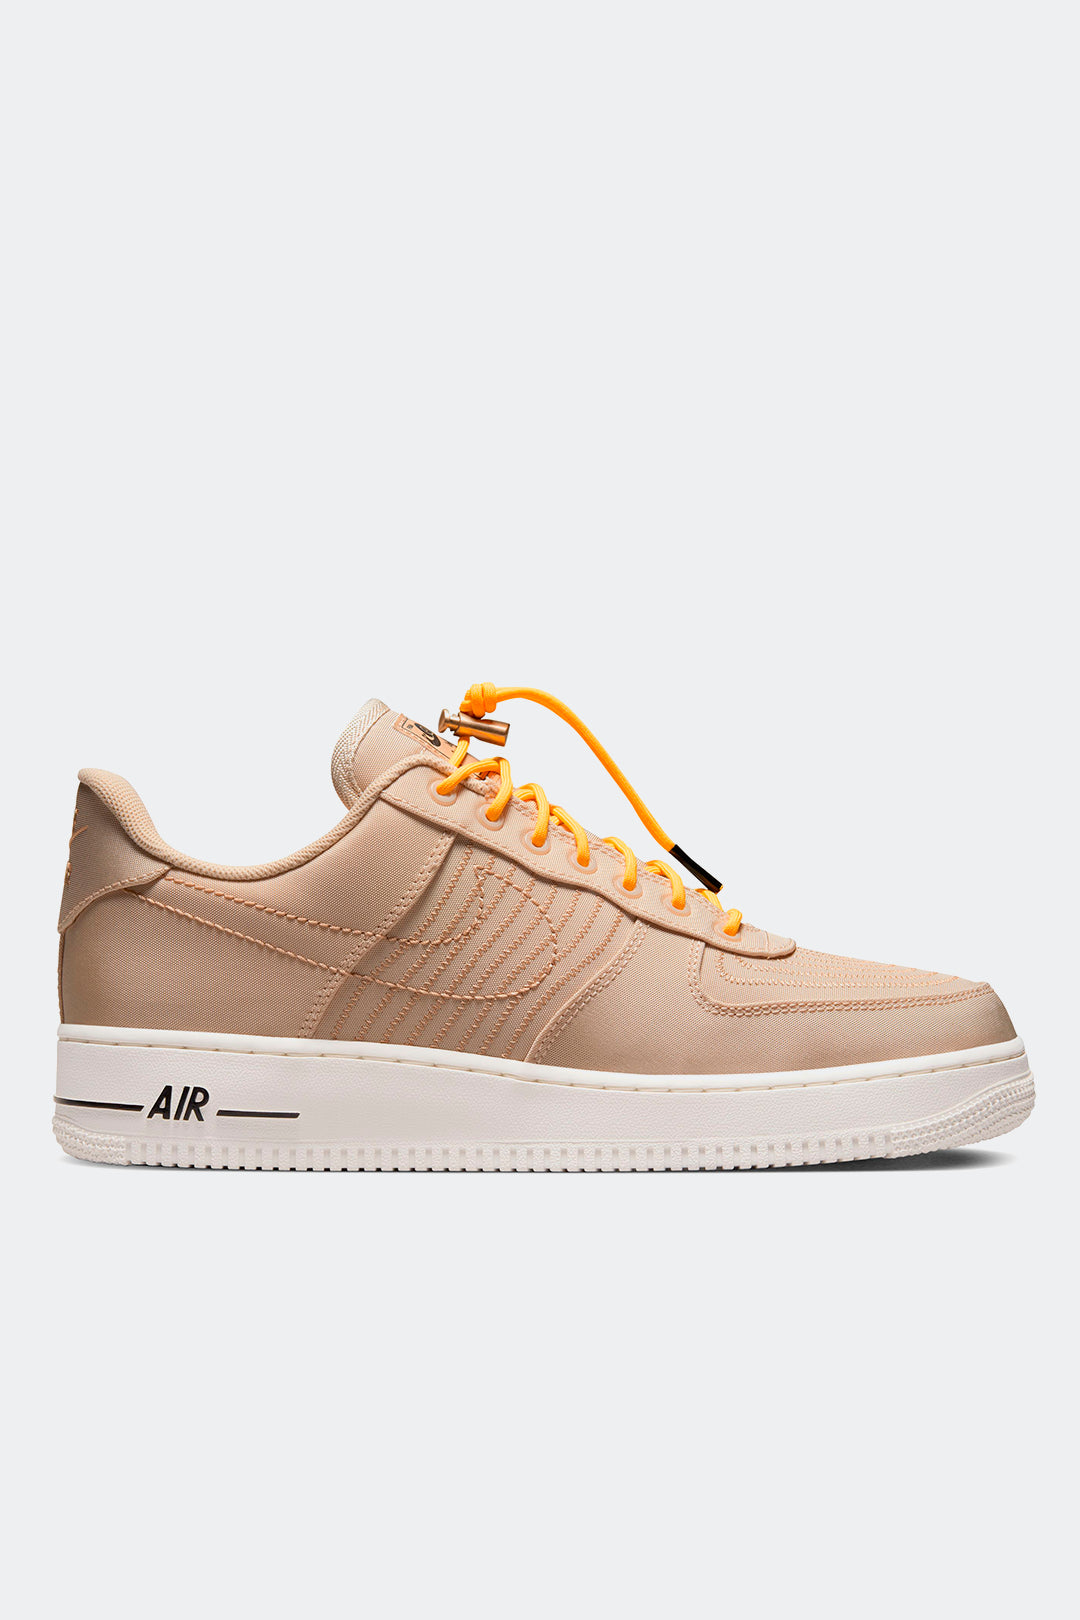 NIKE AIR FORCE 1 '07 LV8 "MOVING COMPANY" - HYPE